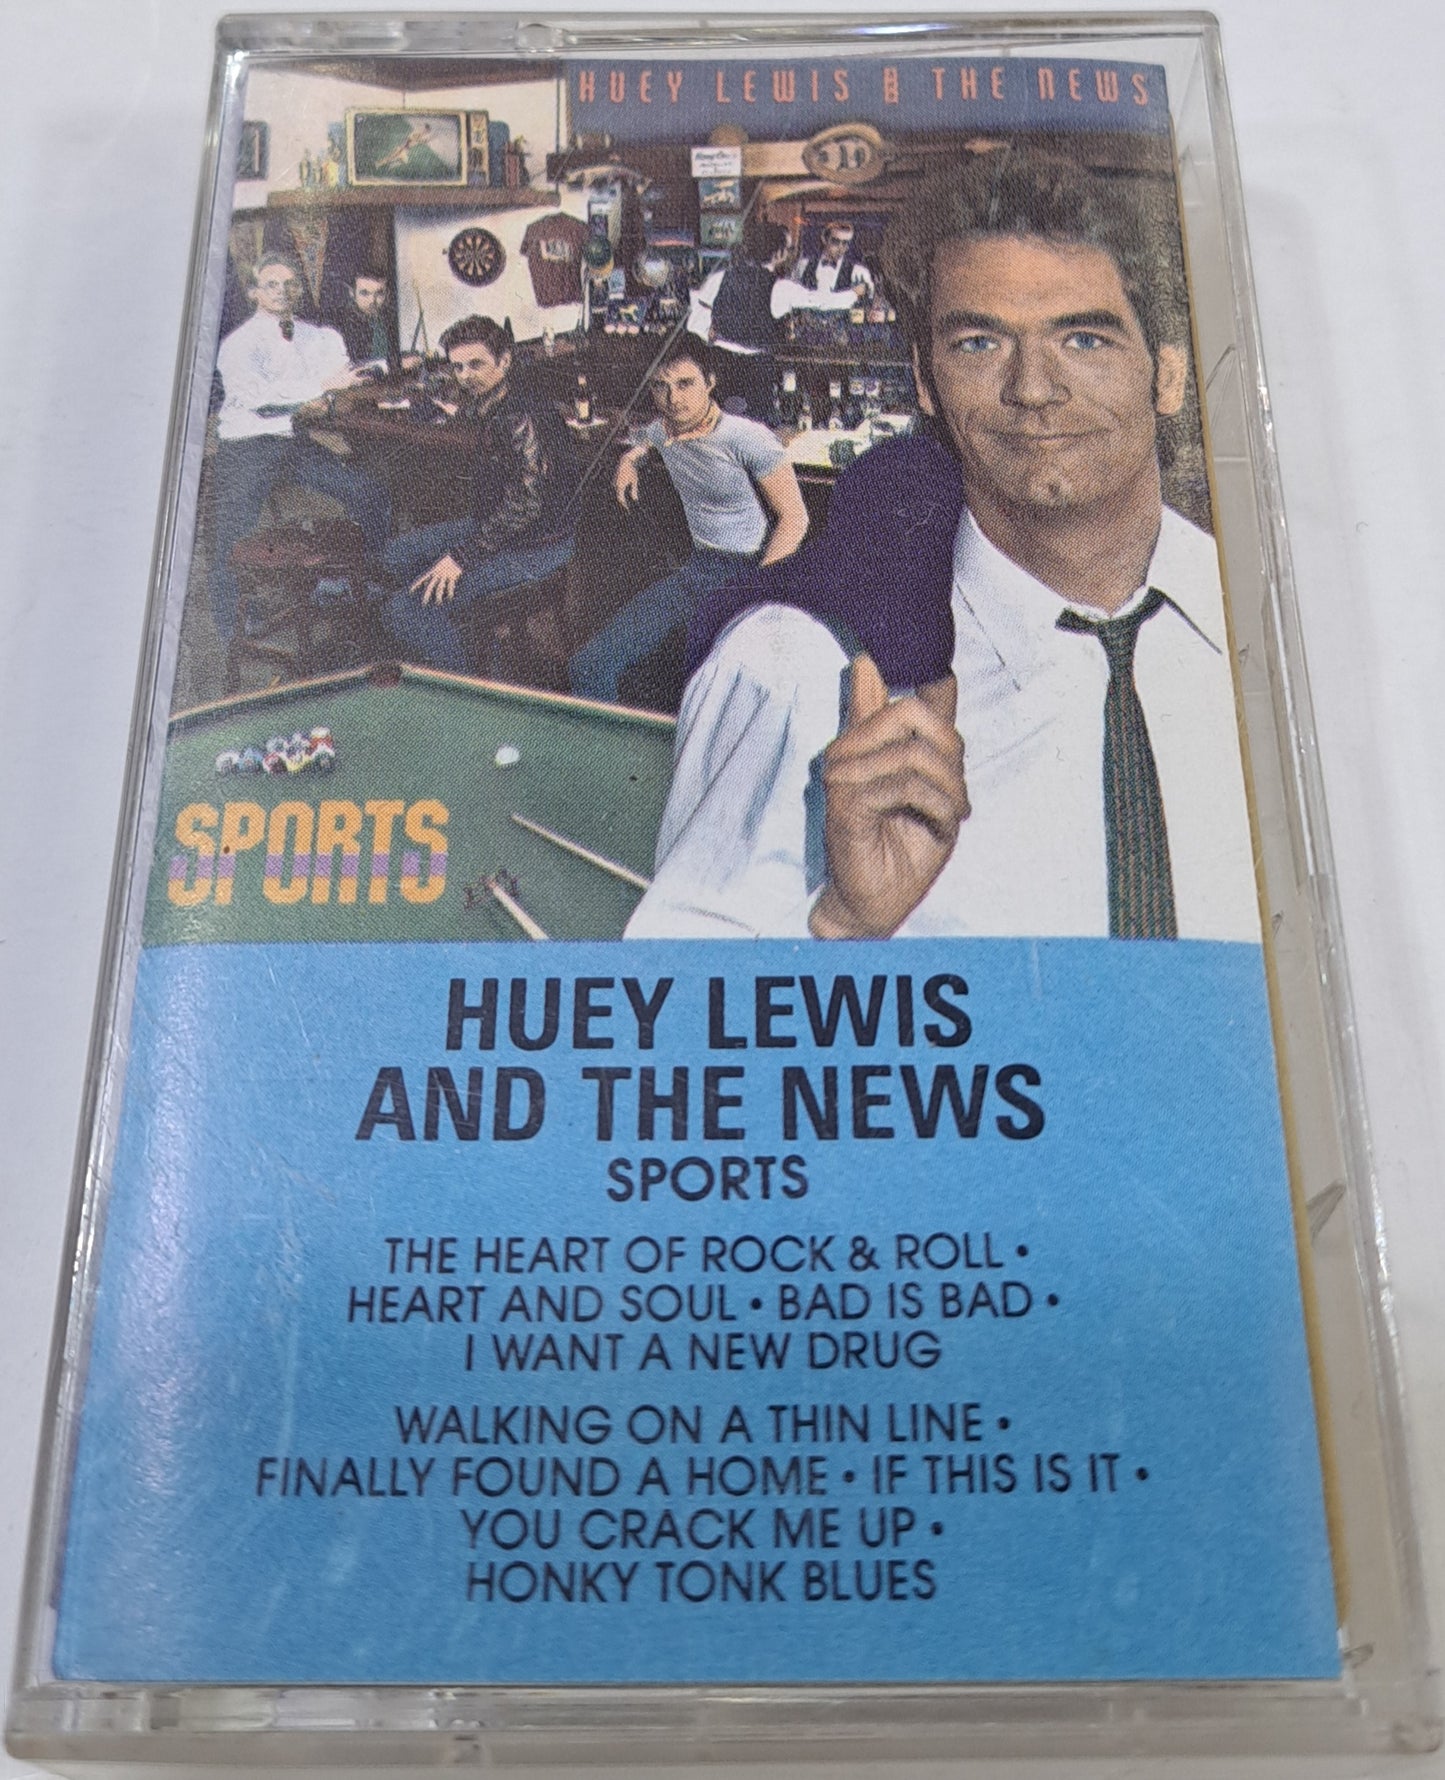 HUEY LEWIS - AND THE NEWS SPORTS CASSETTE